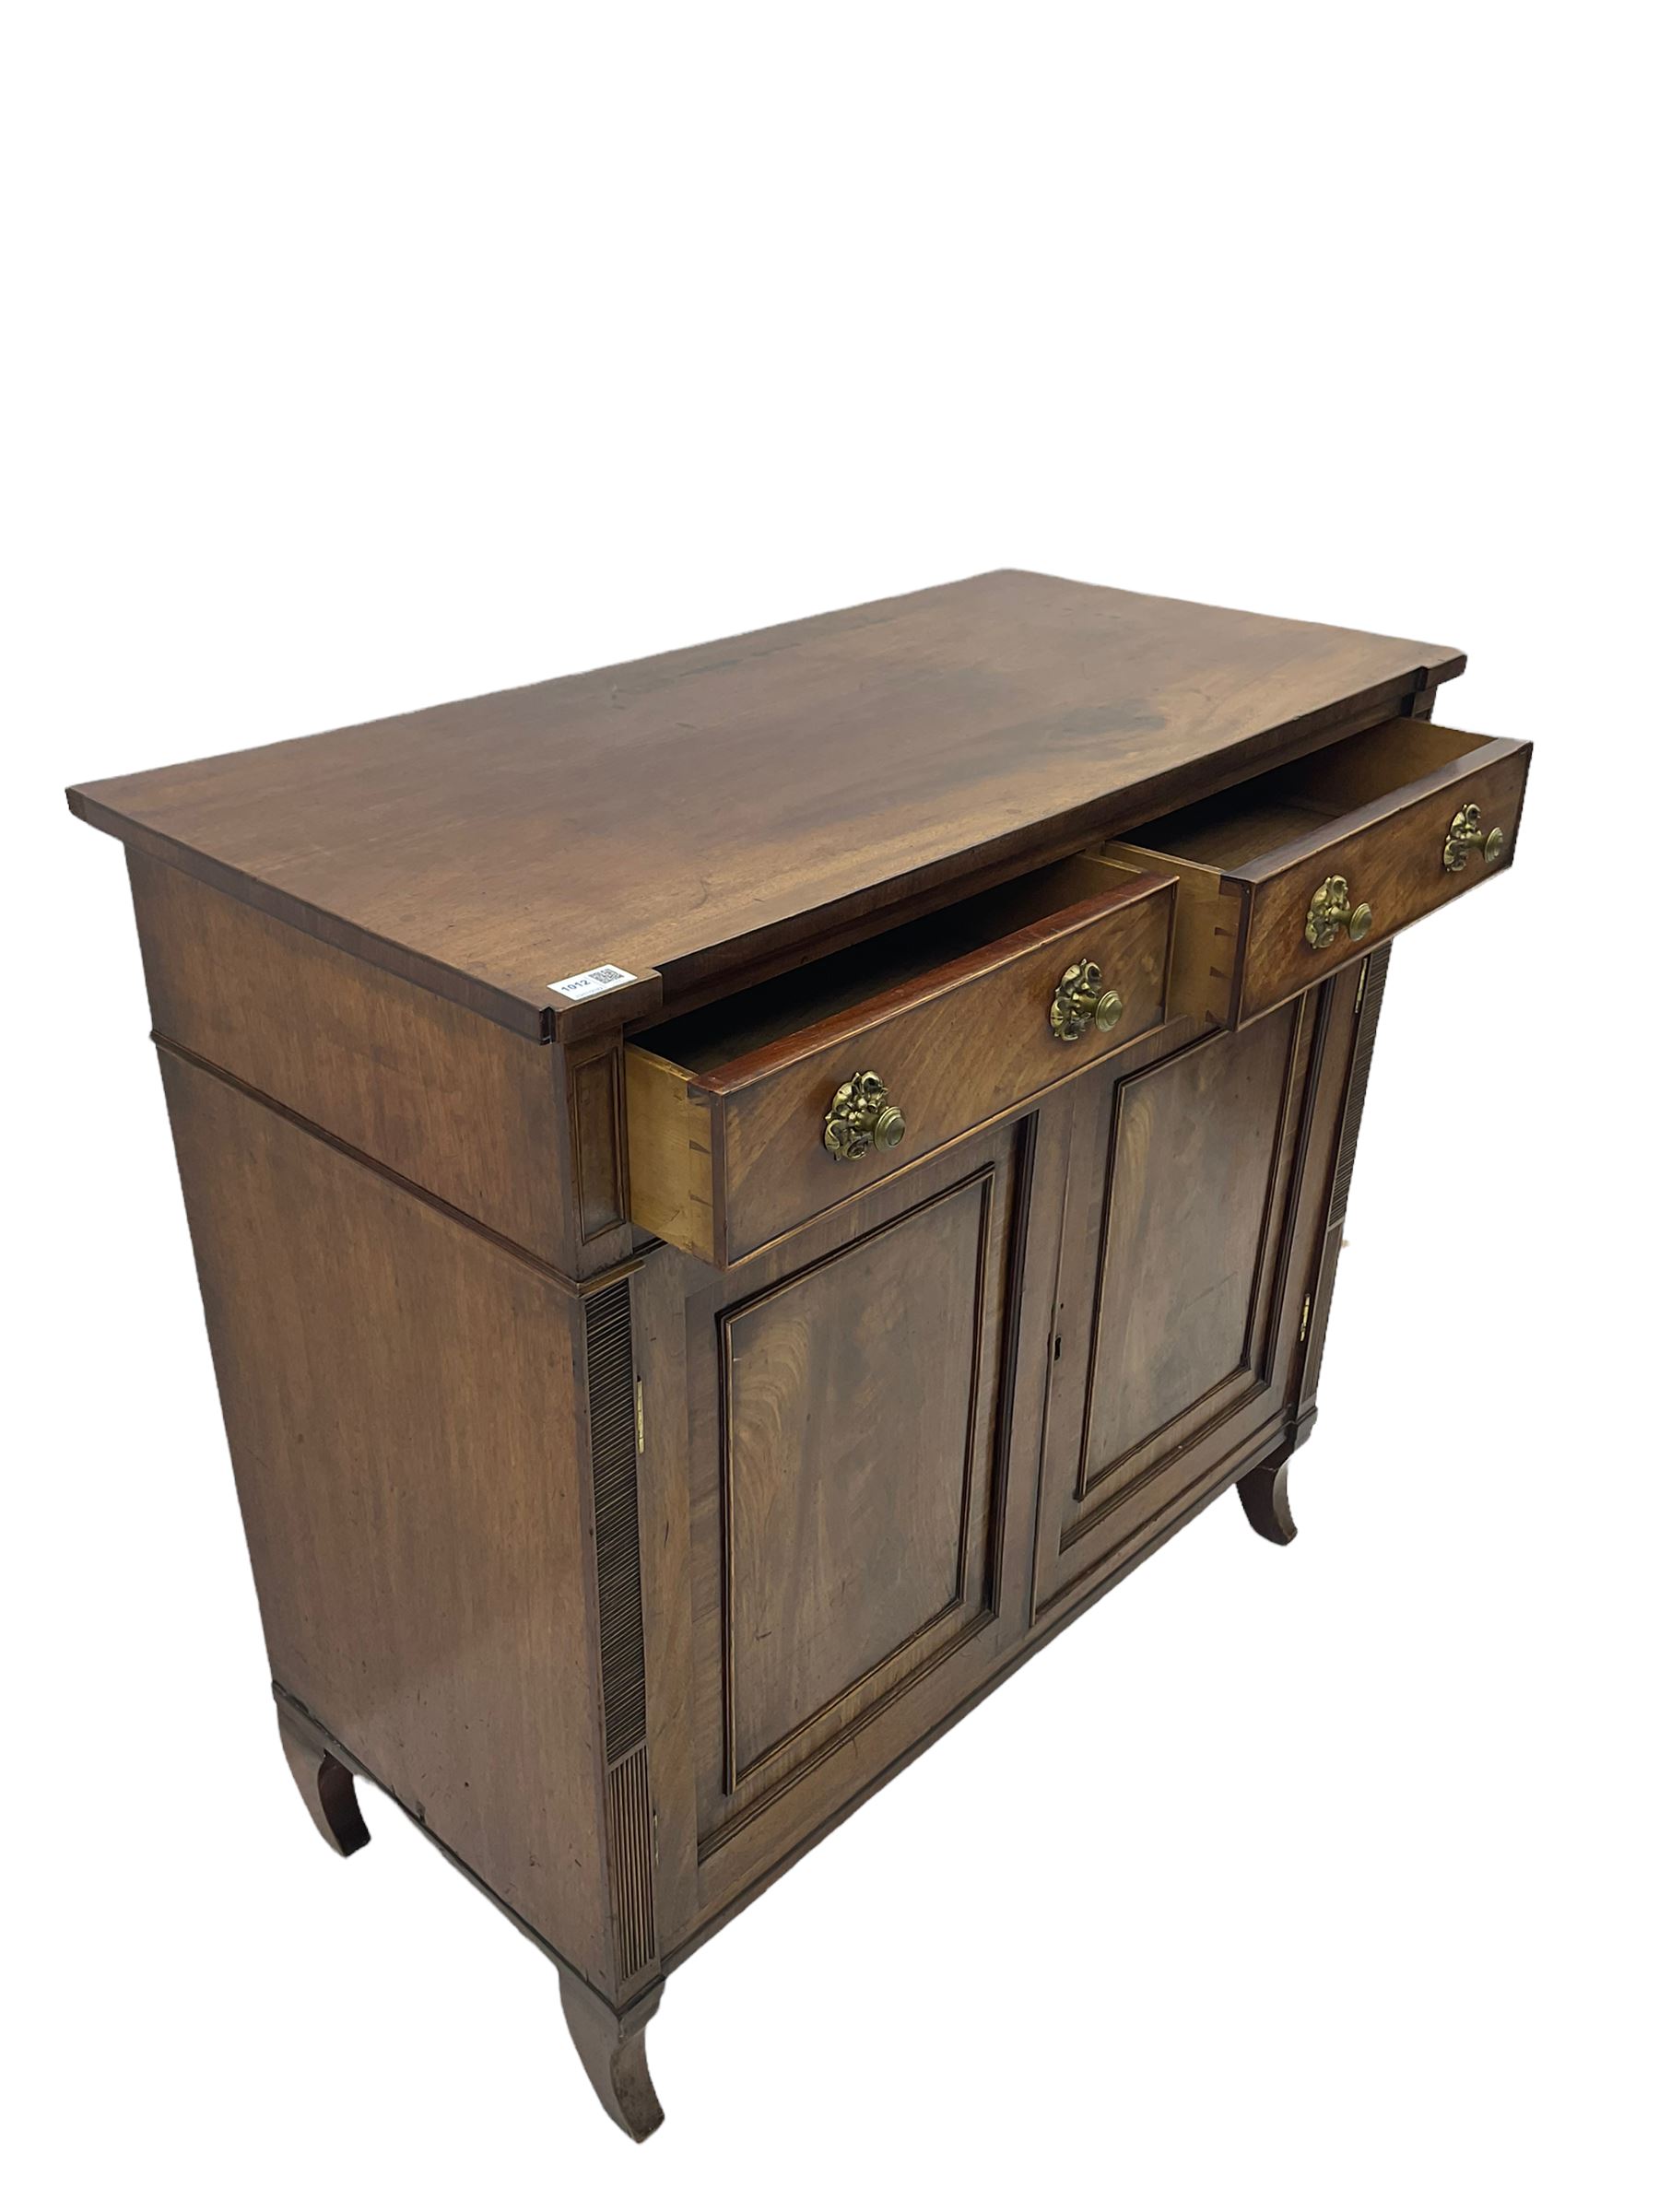 Regency period mahogany side cabinet - Image 8 of 10